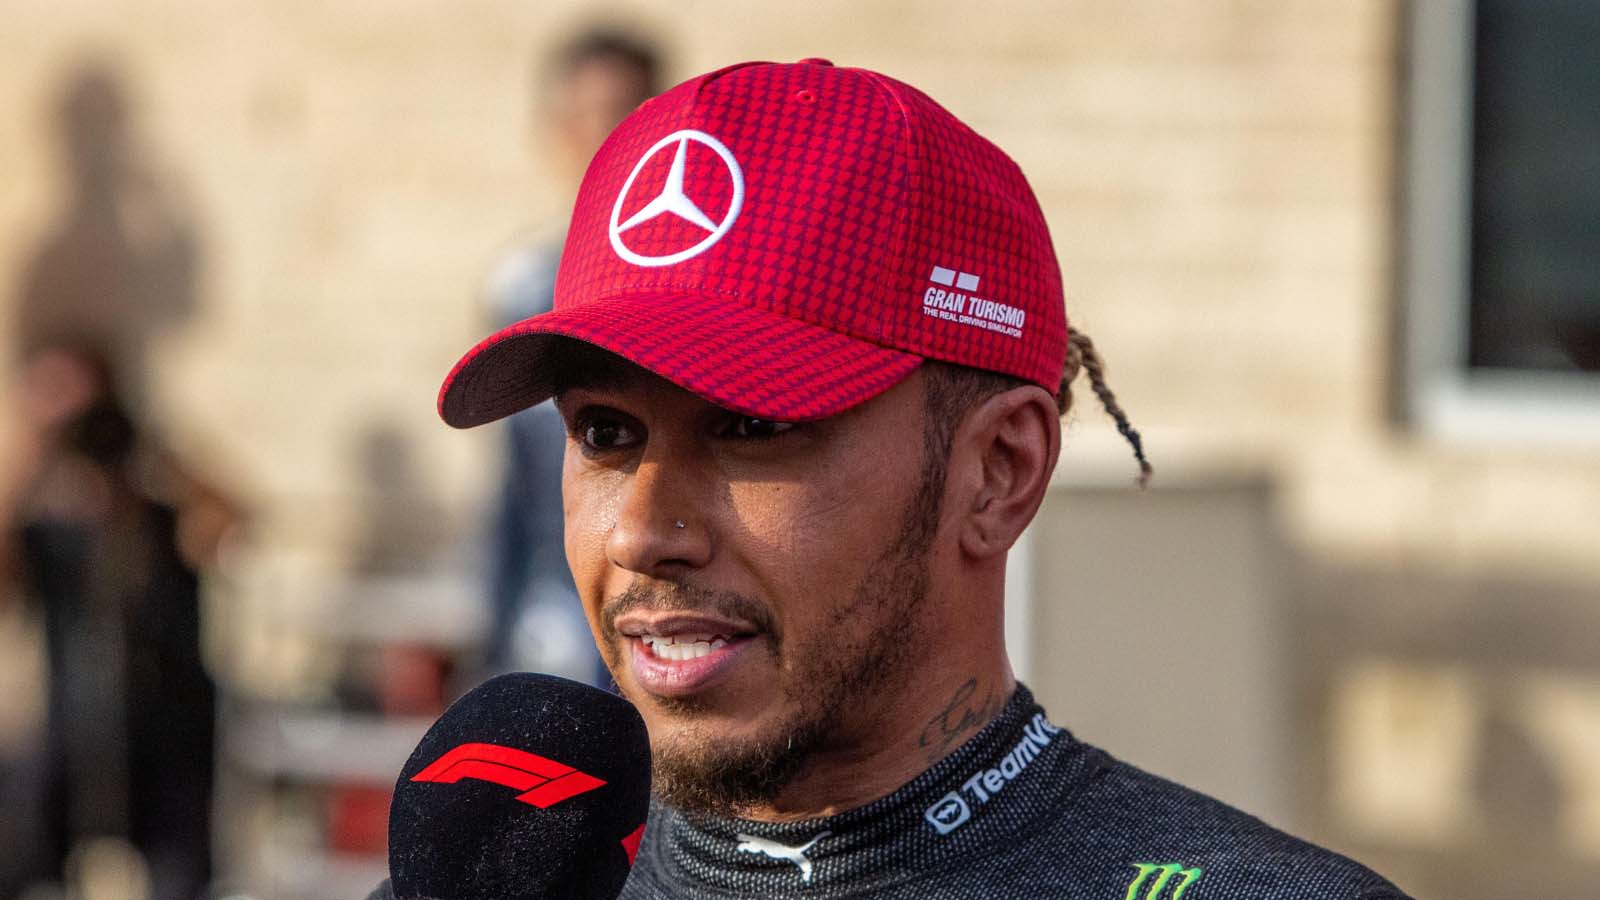 Hamilton: Maybe pain from last year caused the booing